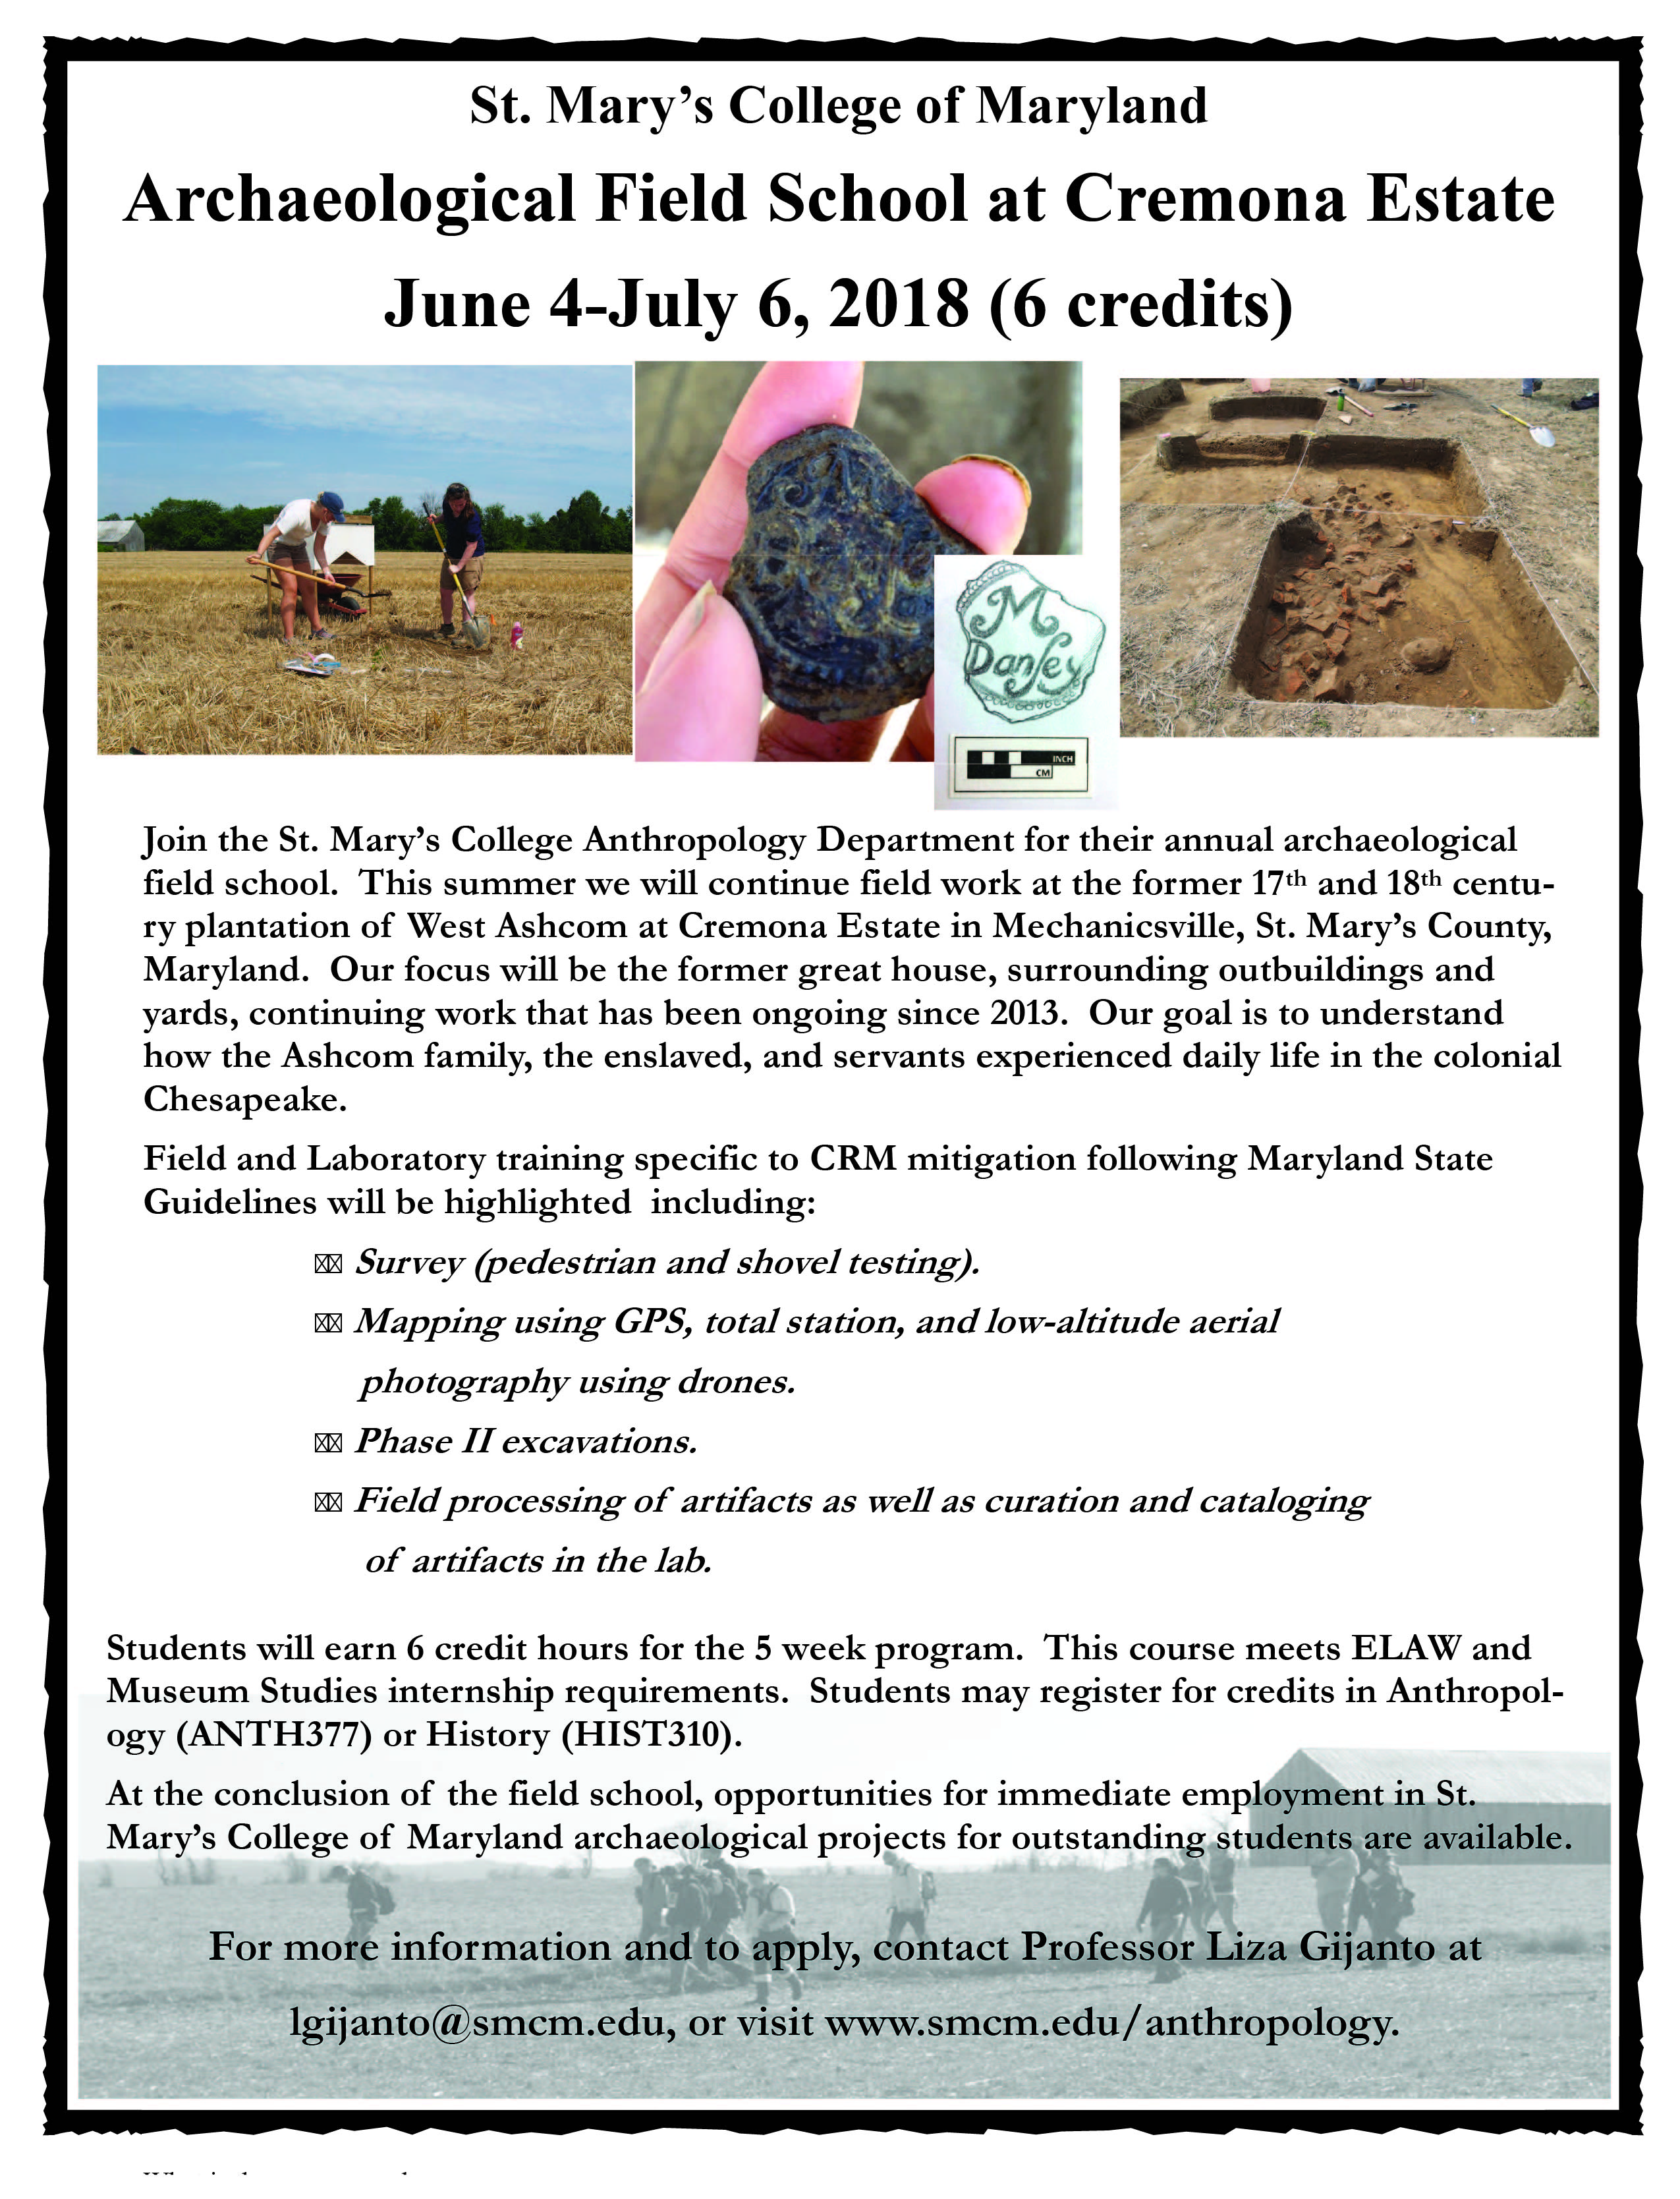 Archaeological Field School at Cremona Estate 2018 flyer